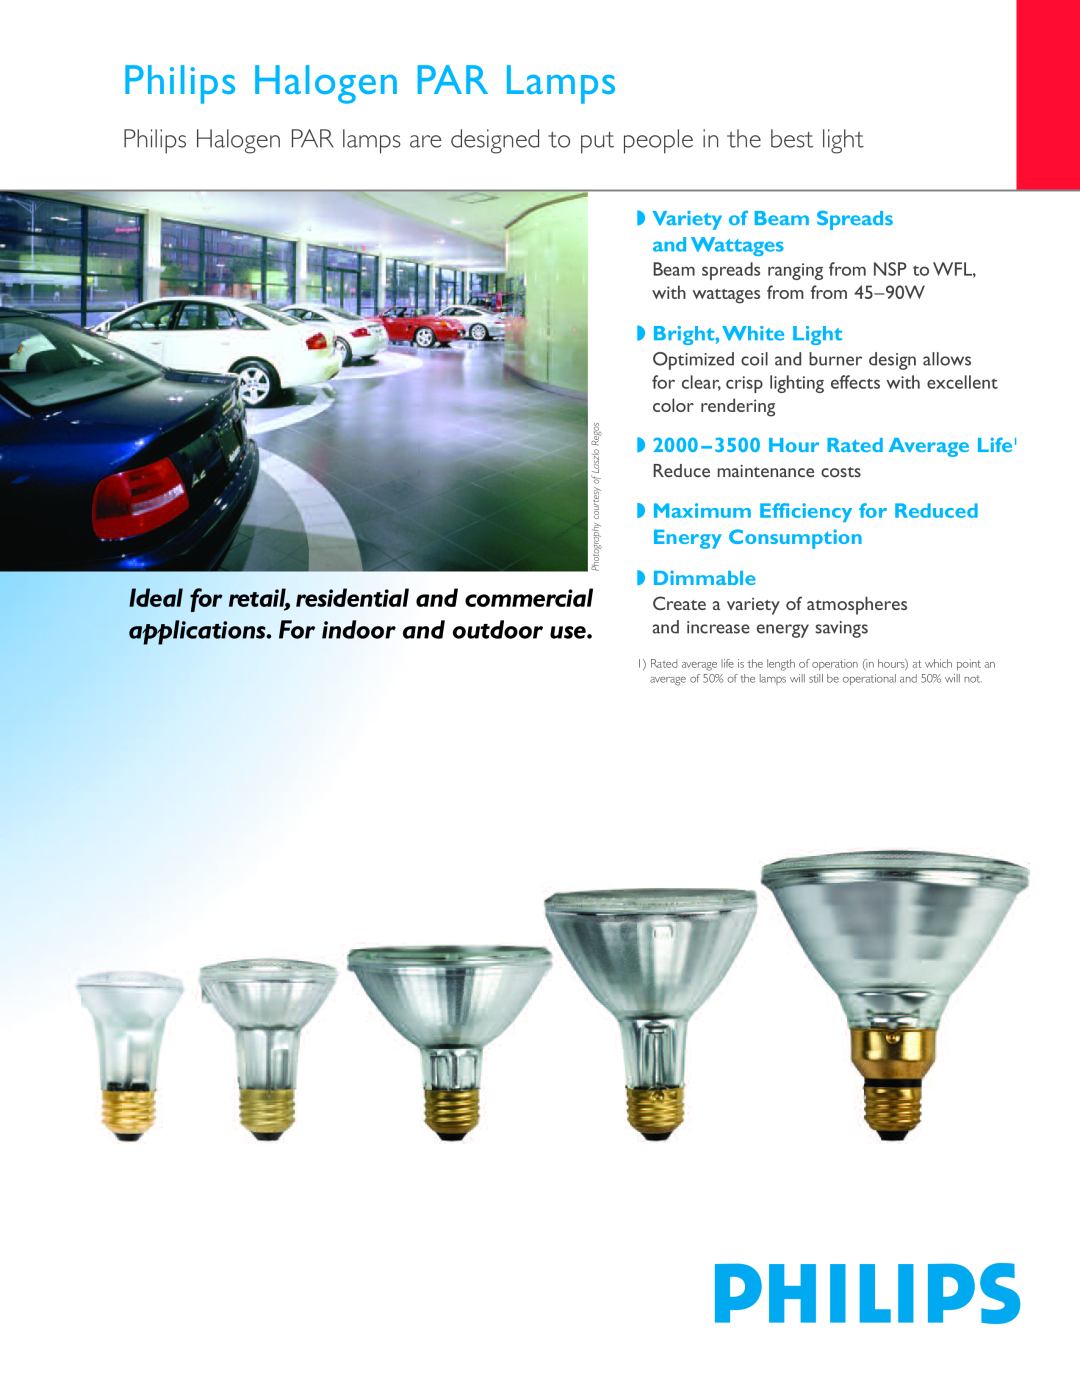 Philips P-5759-D manual Philips Halogen PAR Lamps, Variety of Beam Spreads and Wattages, Bright,White Light 